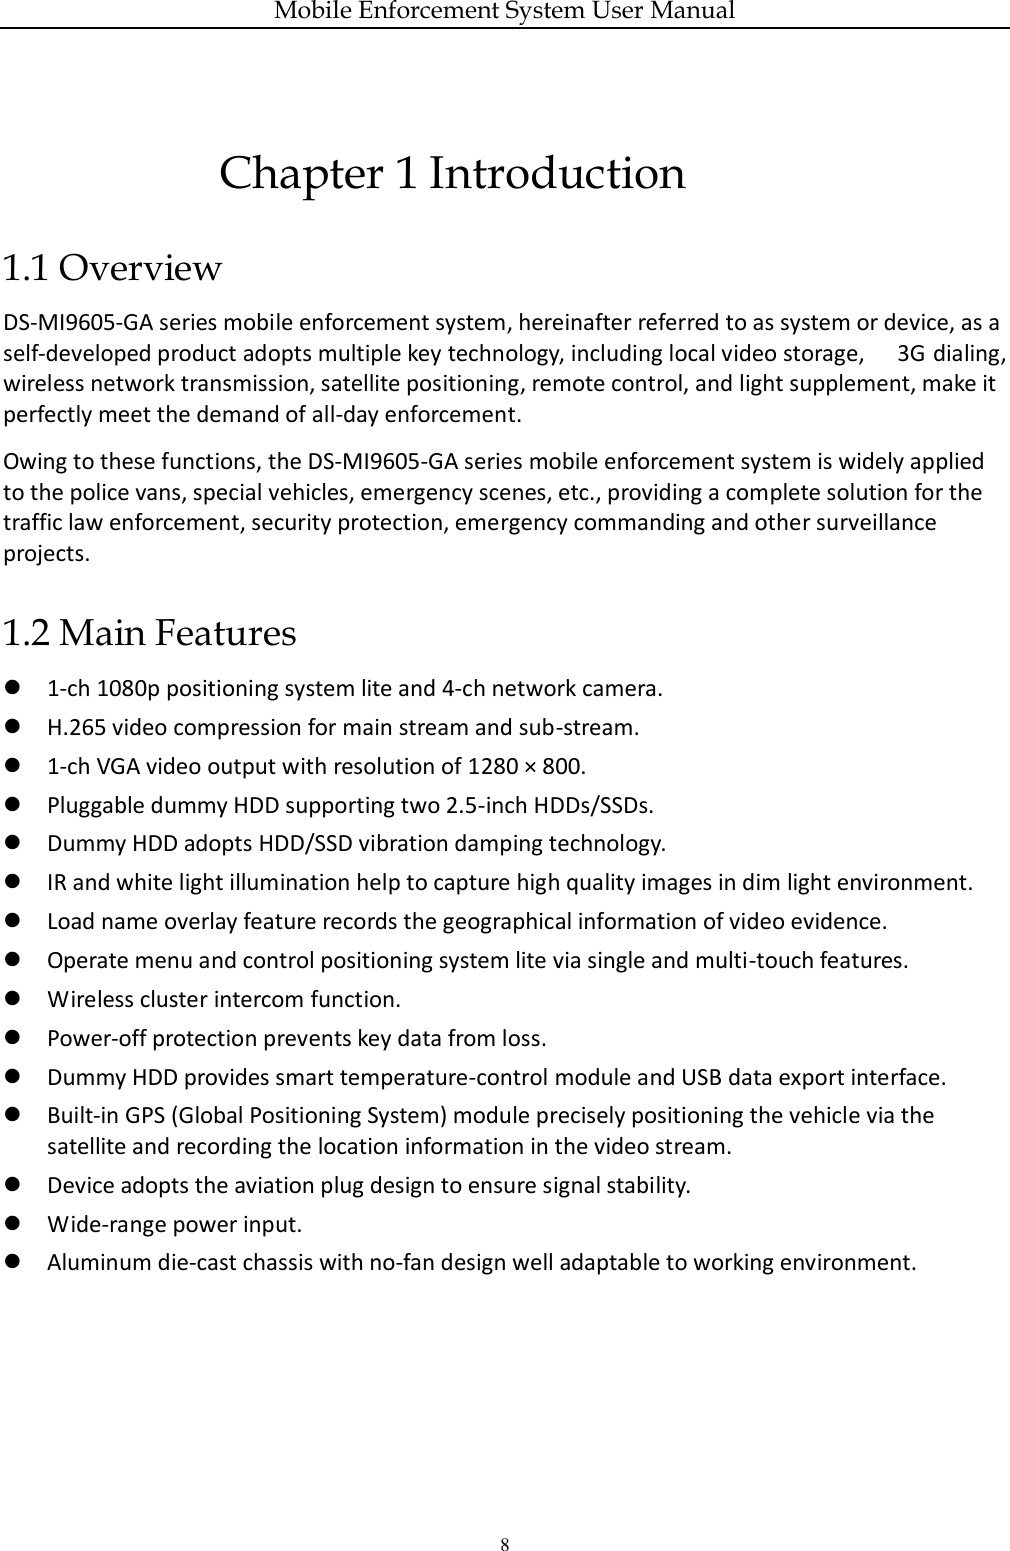 Mobile Enforcement System User Manual 8 Chapter 1 Introduction 1.1 Overview DS-MI9605-GA series mobile enforcement system, hereinafter referred to as system or device, as a self-developed product adopts multiple key technology, including local video storage,  3G  dialing, wireless network transmission, satellite positioning, remote control, and light supplement, make it perfectly meet the demand of all-day enforcement. Owing to these functions, the DS-MI9605-GA series mobile enforcement system is widely applied to the police vans, special vehicles, emergency scenes, etc., providing a complete solution for the traffic law enforcement, security protection, emergency commanding and other surveillance projects. 1.2 Main Features  1-ch 1080p positioning system lite and 4-ch network camera.  H.265 video compression for main stream and sub-stream.  1-ch VGA video output with resolution of 1280 × 800.  Pluggable dummy HDD supporting two 2.5-inch HDDs/SSDs.  Dummy HDD adopts HDD/SSD vibration damping technology.  IR and white light illumination help to capture high quality images in dim light environment.  Load name overlay feature records the geographical information of video evidence.  Operate menu and control positioning system lite via single and multi-touch features.  Wireless cluster intercom function.  Power-off protection prevents key data from loss.  Dummy HDD provides smart temperature-control module and USB data export interface.  Built-in GPS (Global Positioning System) module precisely positioning the vehicle via the satellite and recording the location information in the video stream.  Device adopts the aviation plug design to ensure signal stability.  Wide-range power input.  Aluminum die-cast chassis with no-fan design well adaptable to working environment.   